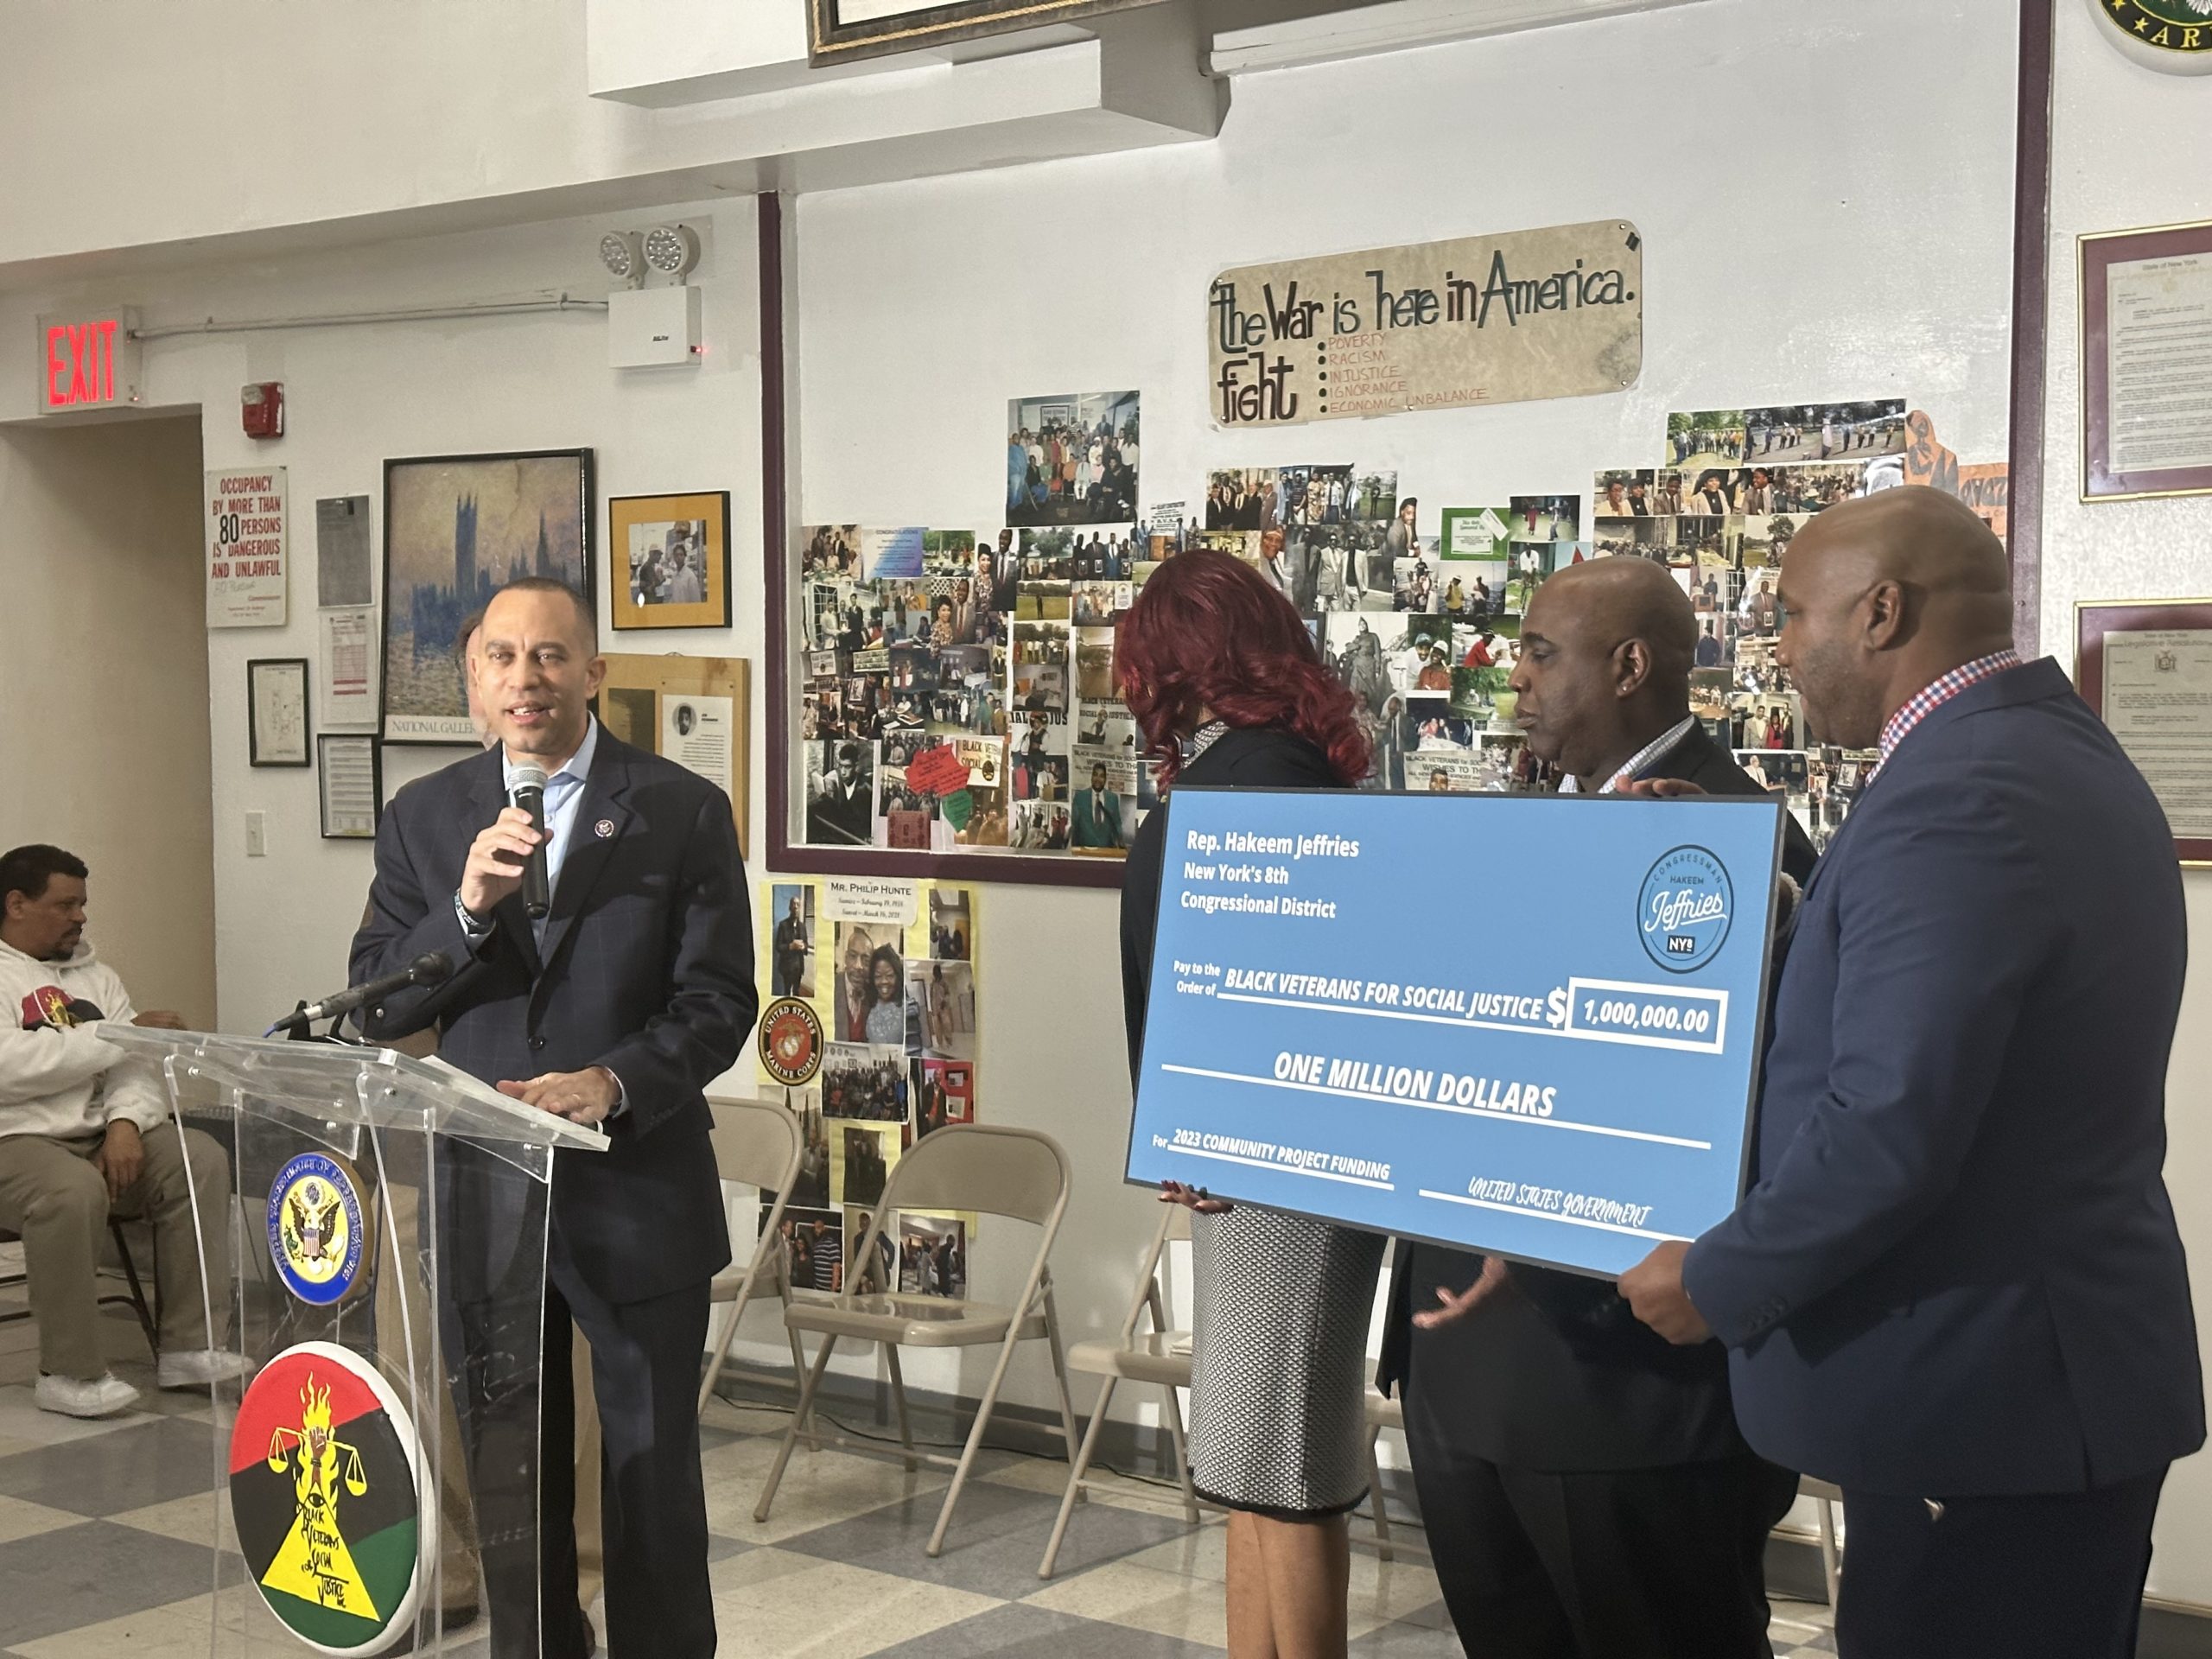 Black Veterans for Social Justice receives $1M in funds